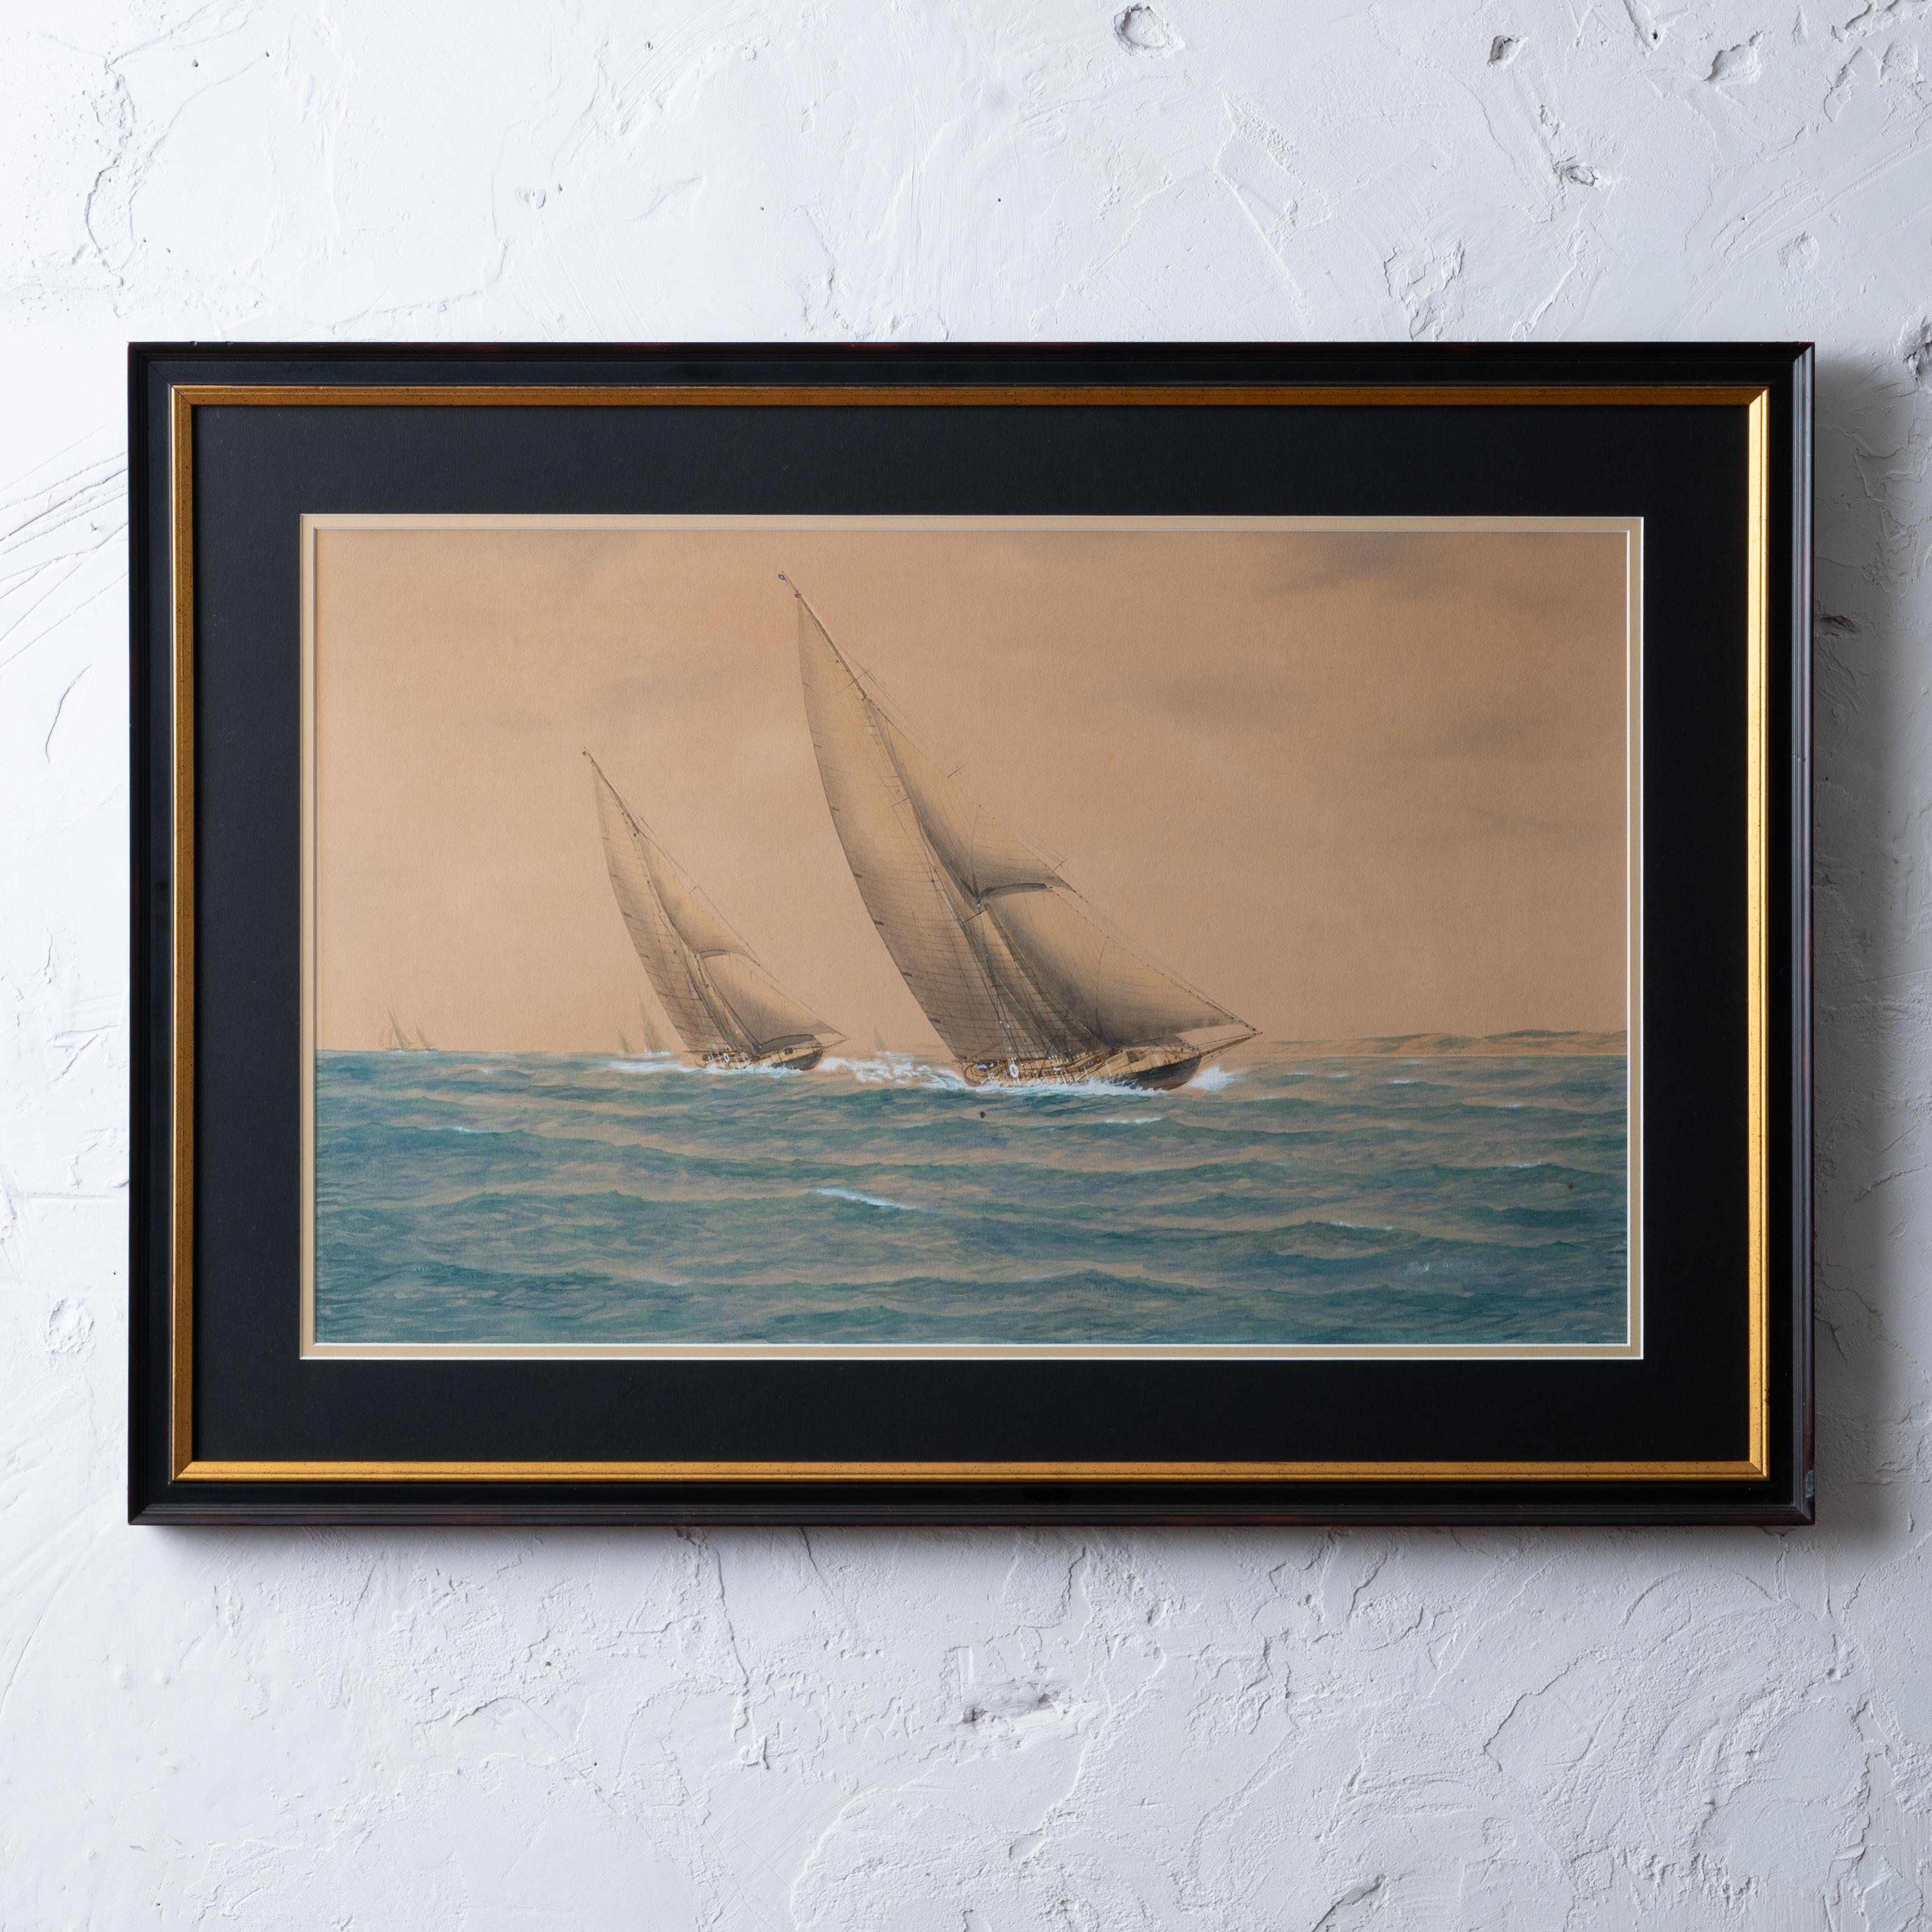 Jay Arnold
(American, b.1890)

A watercolor painting of sailing yachts in Long Island Sound, circa 1920s.

sight: 24 ¾ by 15 ¼ inches
frame: 32 by 22 ½ inches

